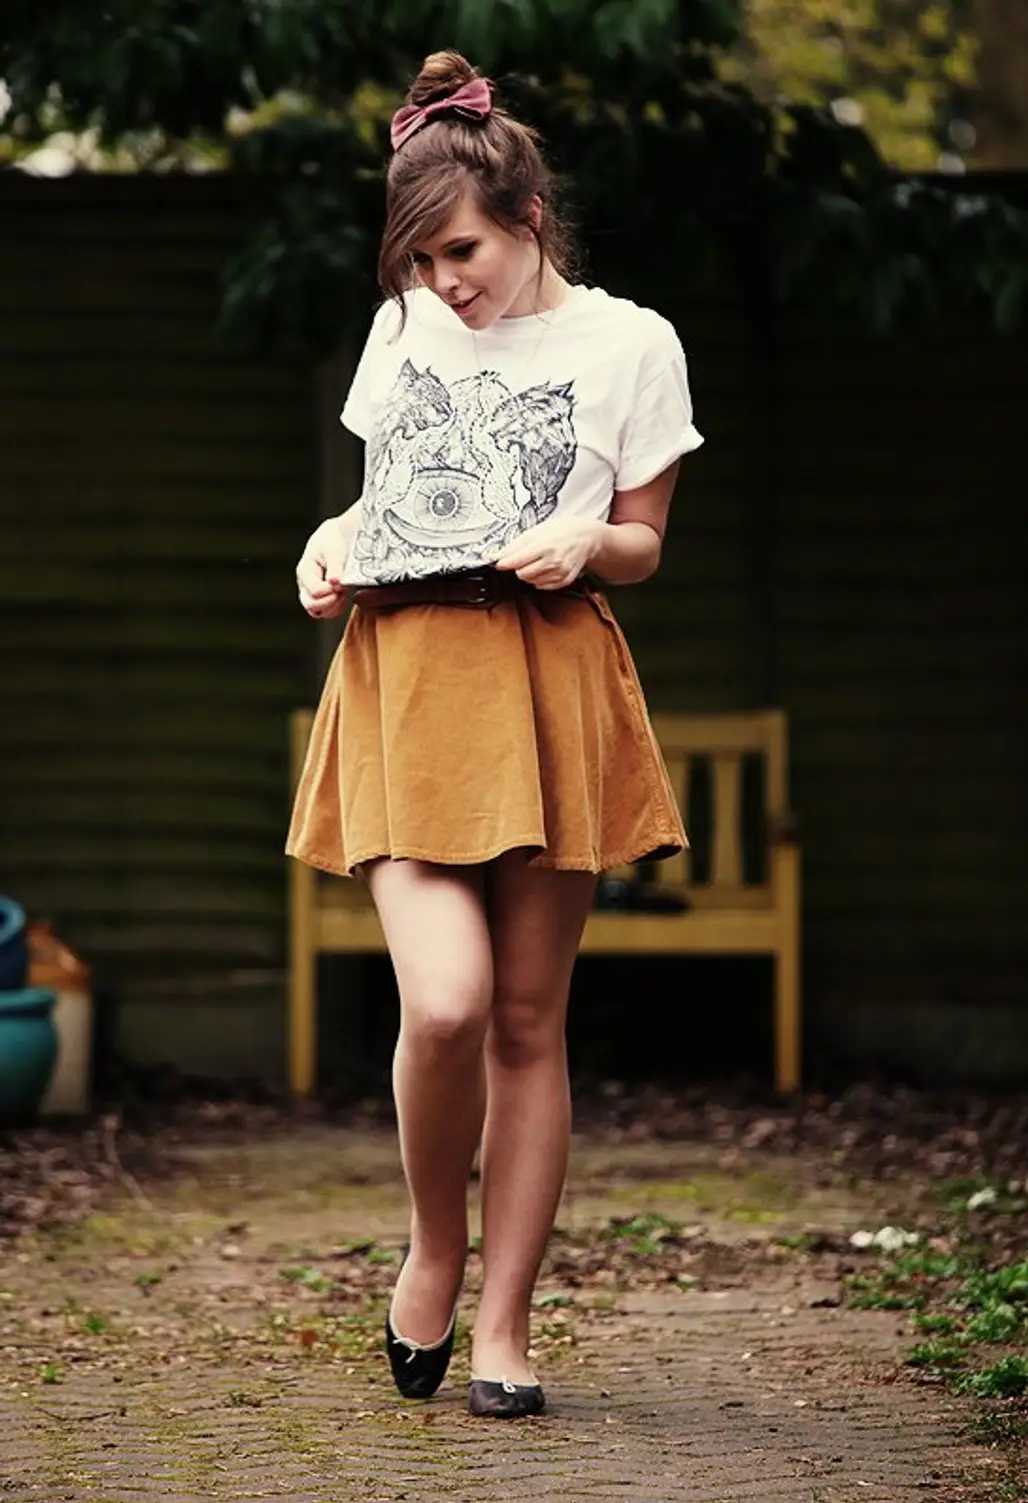 Pair Your Tee with a High-waisted Skirt or Shorts